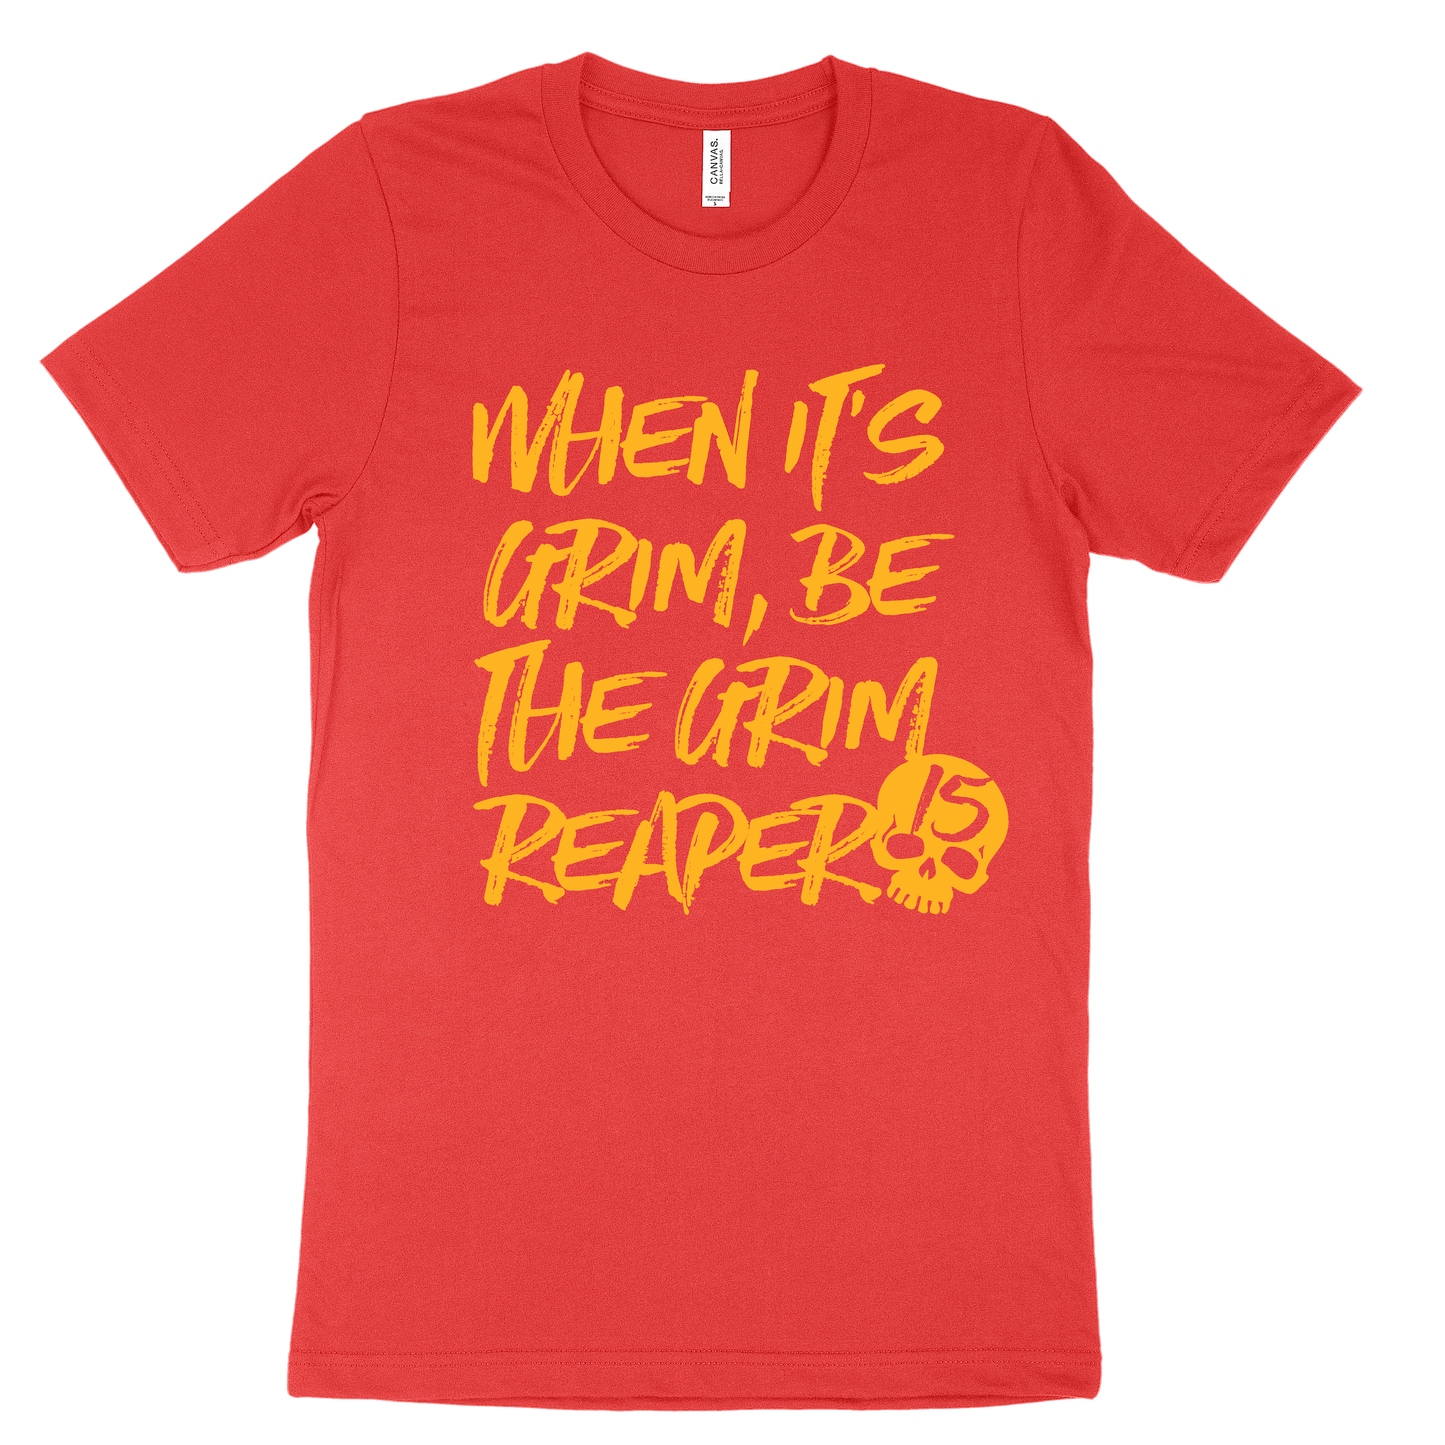 When It's Grim, Be The Grim Reaper Tee - Red